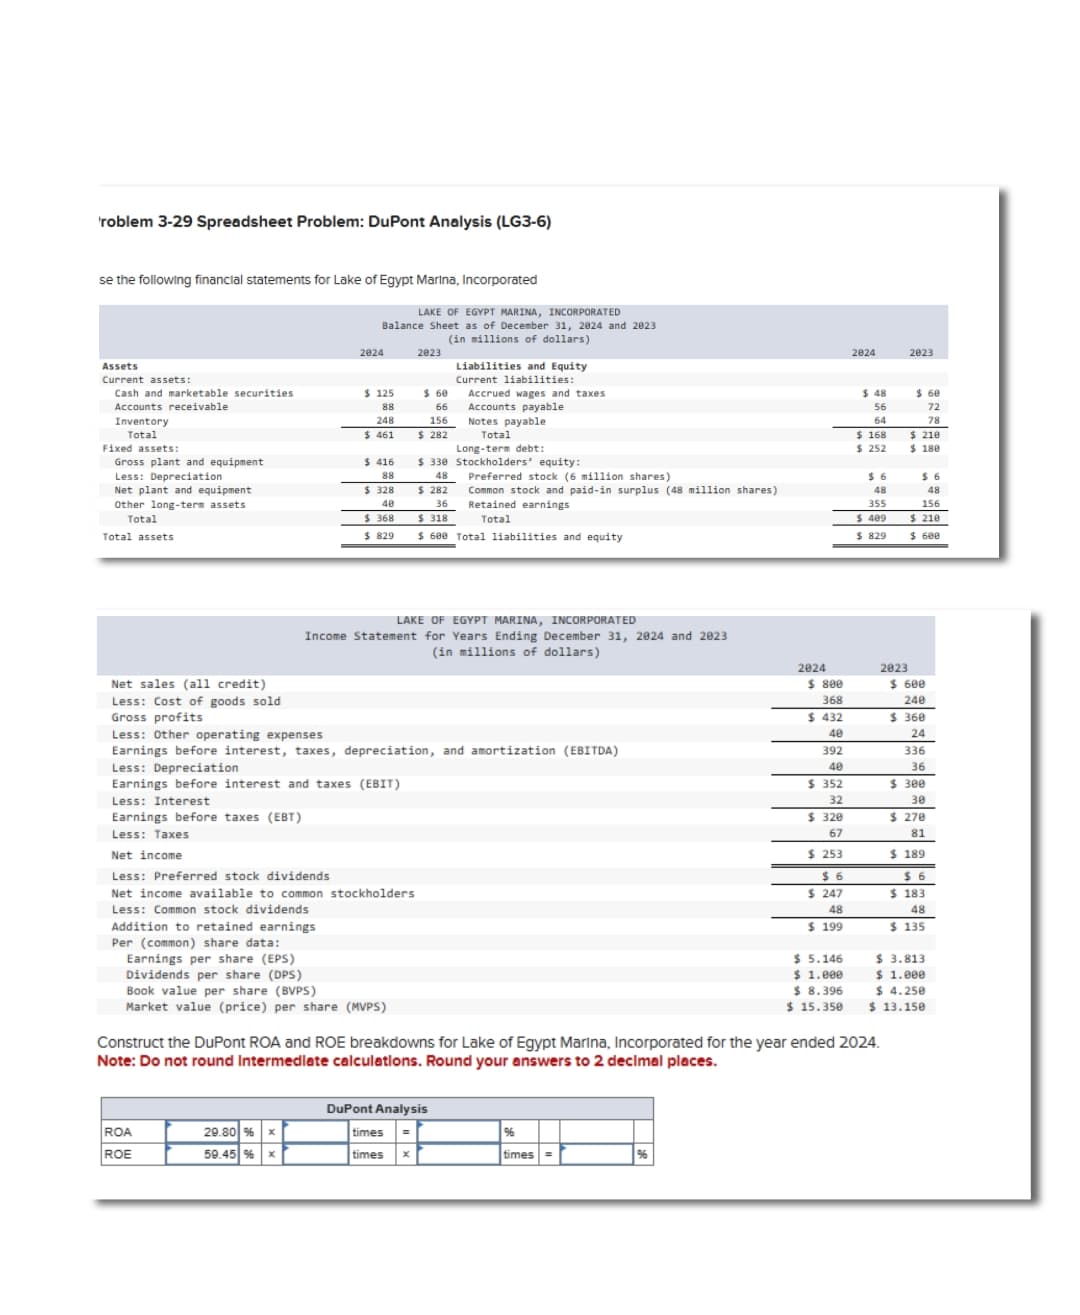 'roblem 3-29 Spreadsheet Problem: DuPont Analysis (LG3-6)
se the following financial statements for Lake of Egypt Marina, Incorporated
LAKE OF EGYPT MARINA, INCORPORATED
Balance Sheet as of December 31, 2024 and 2023
(in millions of dollars)
2024
2023
Assets
Current assets:
Liabilities and Equity
Cash and marketable securities
Accounts receivable
$ 125
$ 60
Inventory
88
248
66
156
Current liabilities:
Accrued wages and taxes
Accounts payable
Notes payable
Total
Fixed assets:
$ 461
$ 282
Total
Long-term debt:
Gross plant and equipment
$ 416
$ 330 Stockholders' equity:
Less: Depreciation
88
48
Preferred stock (6 million shares)
Net plant and equipment
$ 328
$ 282
Other long-term assets
Total
40
36
$ 368
$ 318
Total
Total assets
$ 829
Common stock and paid-in surplus (48 million shares)
Retained earnings
$ 600 Total liabilities and equity
Net sales (all credit)
Less: Cost of goods sold
Gross profits
LAKE OF EGYPT MARINA, INCORPORATED
Income Statement for Years Ending December 31, 2024 and 2023
(in millions of dollars)
Less: Other operating expenses
Earnings before interest, taxes, depreciation, and amortization (EBITDA)
Less: Depreciation
Earnings before interest and taxes (EBIT)
Less: Interest
Earnings before taxes (EBT)
Less: Taxes
Net income
Less: Preferred stock dividends
Net income available to common stockholders
Less: Common stock dividends
Addition to retained earnings
Per (common) share data:
Earnings per share (EPS)
Dividends per share (DPS)
Book value per share (BVPS)
Market value (price) per share (MVPS)
2024
2023
$ 48
$ 60
56
72
64
78
$ 168
$ 210
$ 252
$ 180
$ 6
$ 6
48
48
355
156
$ 489
$ 210
$ 829
$ 600
2024
$ 800
368
$ 432
40
2023
$ 600
240
$ 360
24
392
336
40
36
$ 352
32
$ 300
30
$ 320
$ 270
67
81
$ 253
$ 189
$ 6
$ 6
$ 247
$ 183
48
48
$ 199
$ 135
$ 5.146
$ 3.813
$ 1.000
$ 1.000
$ 8.396
$ 4.250
$ 15.350
$ 13.150
Construct the DuPont ROA and ROE breakdowns for Lake of Egypt Marina, Incorporated for the year ended 2024.
Note: Do not round Intermediate calculations. Round your answers to 2 decimal places.
DuPont Analysis
ROA
29.80 % x
times
96
ROE
59.45 % x
times
times =
96